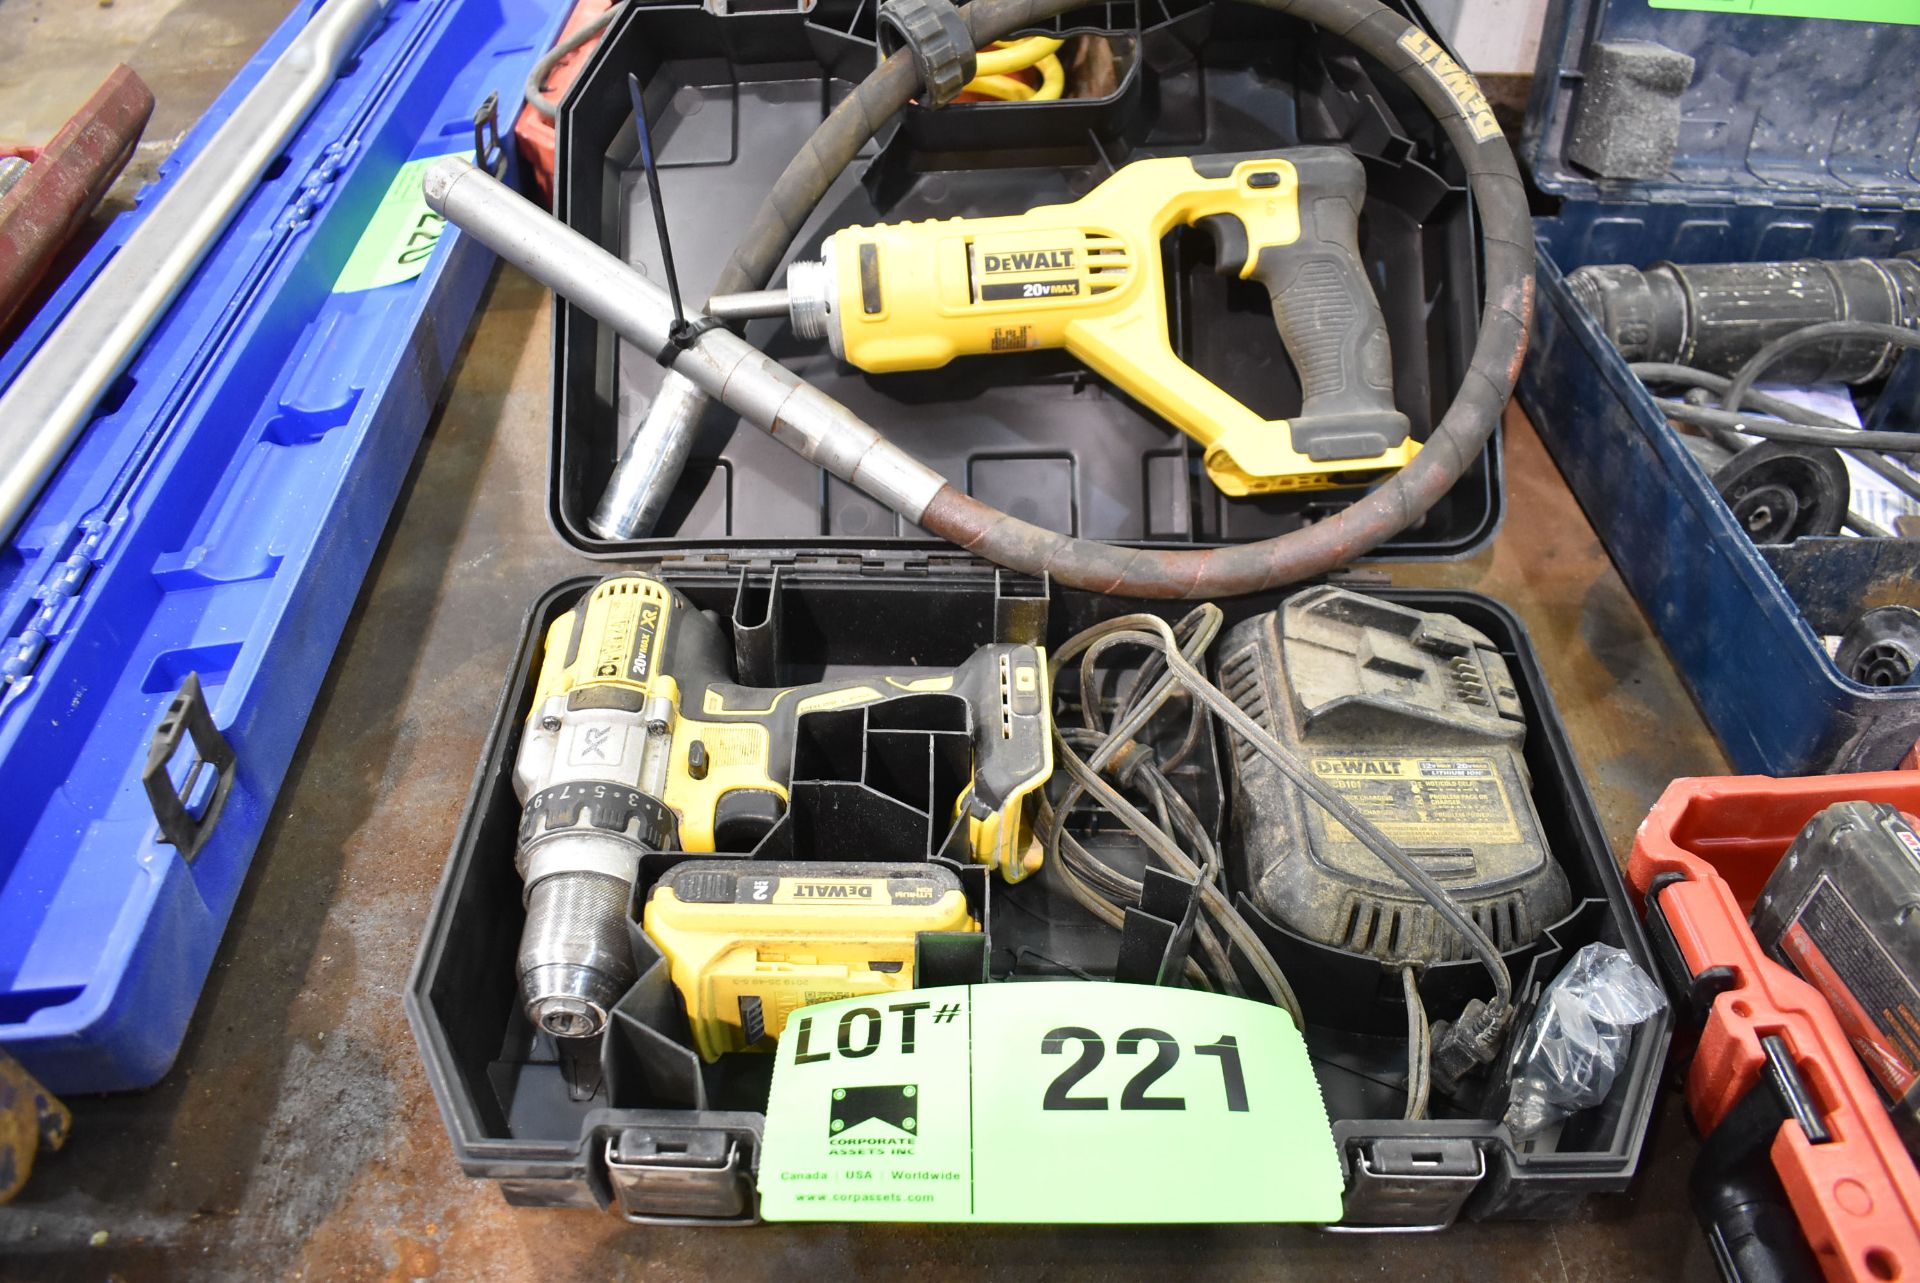 LOT/ DEWALT CORDLESS 20VOLT TOOLS WITH CHARGER AND 1 BATTERY [RIGGING FEE FOR LOT #221 - $20 CAD